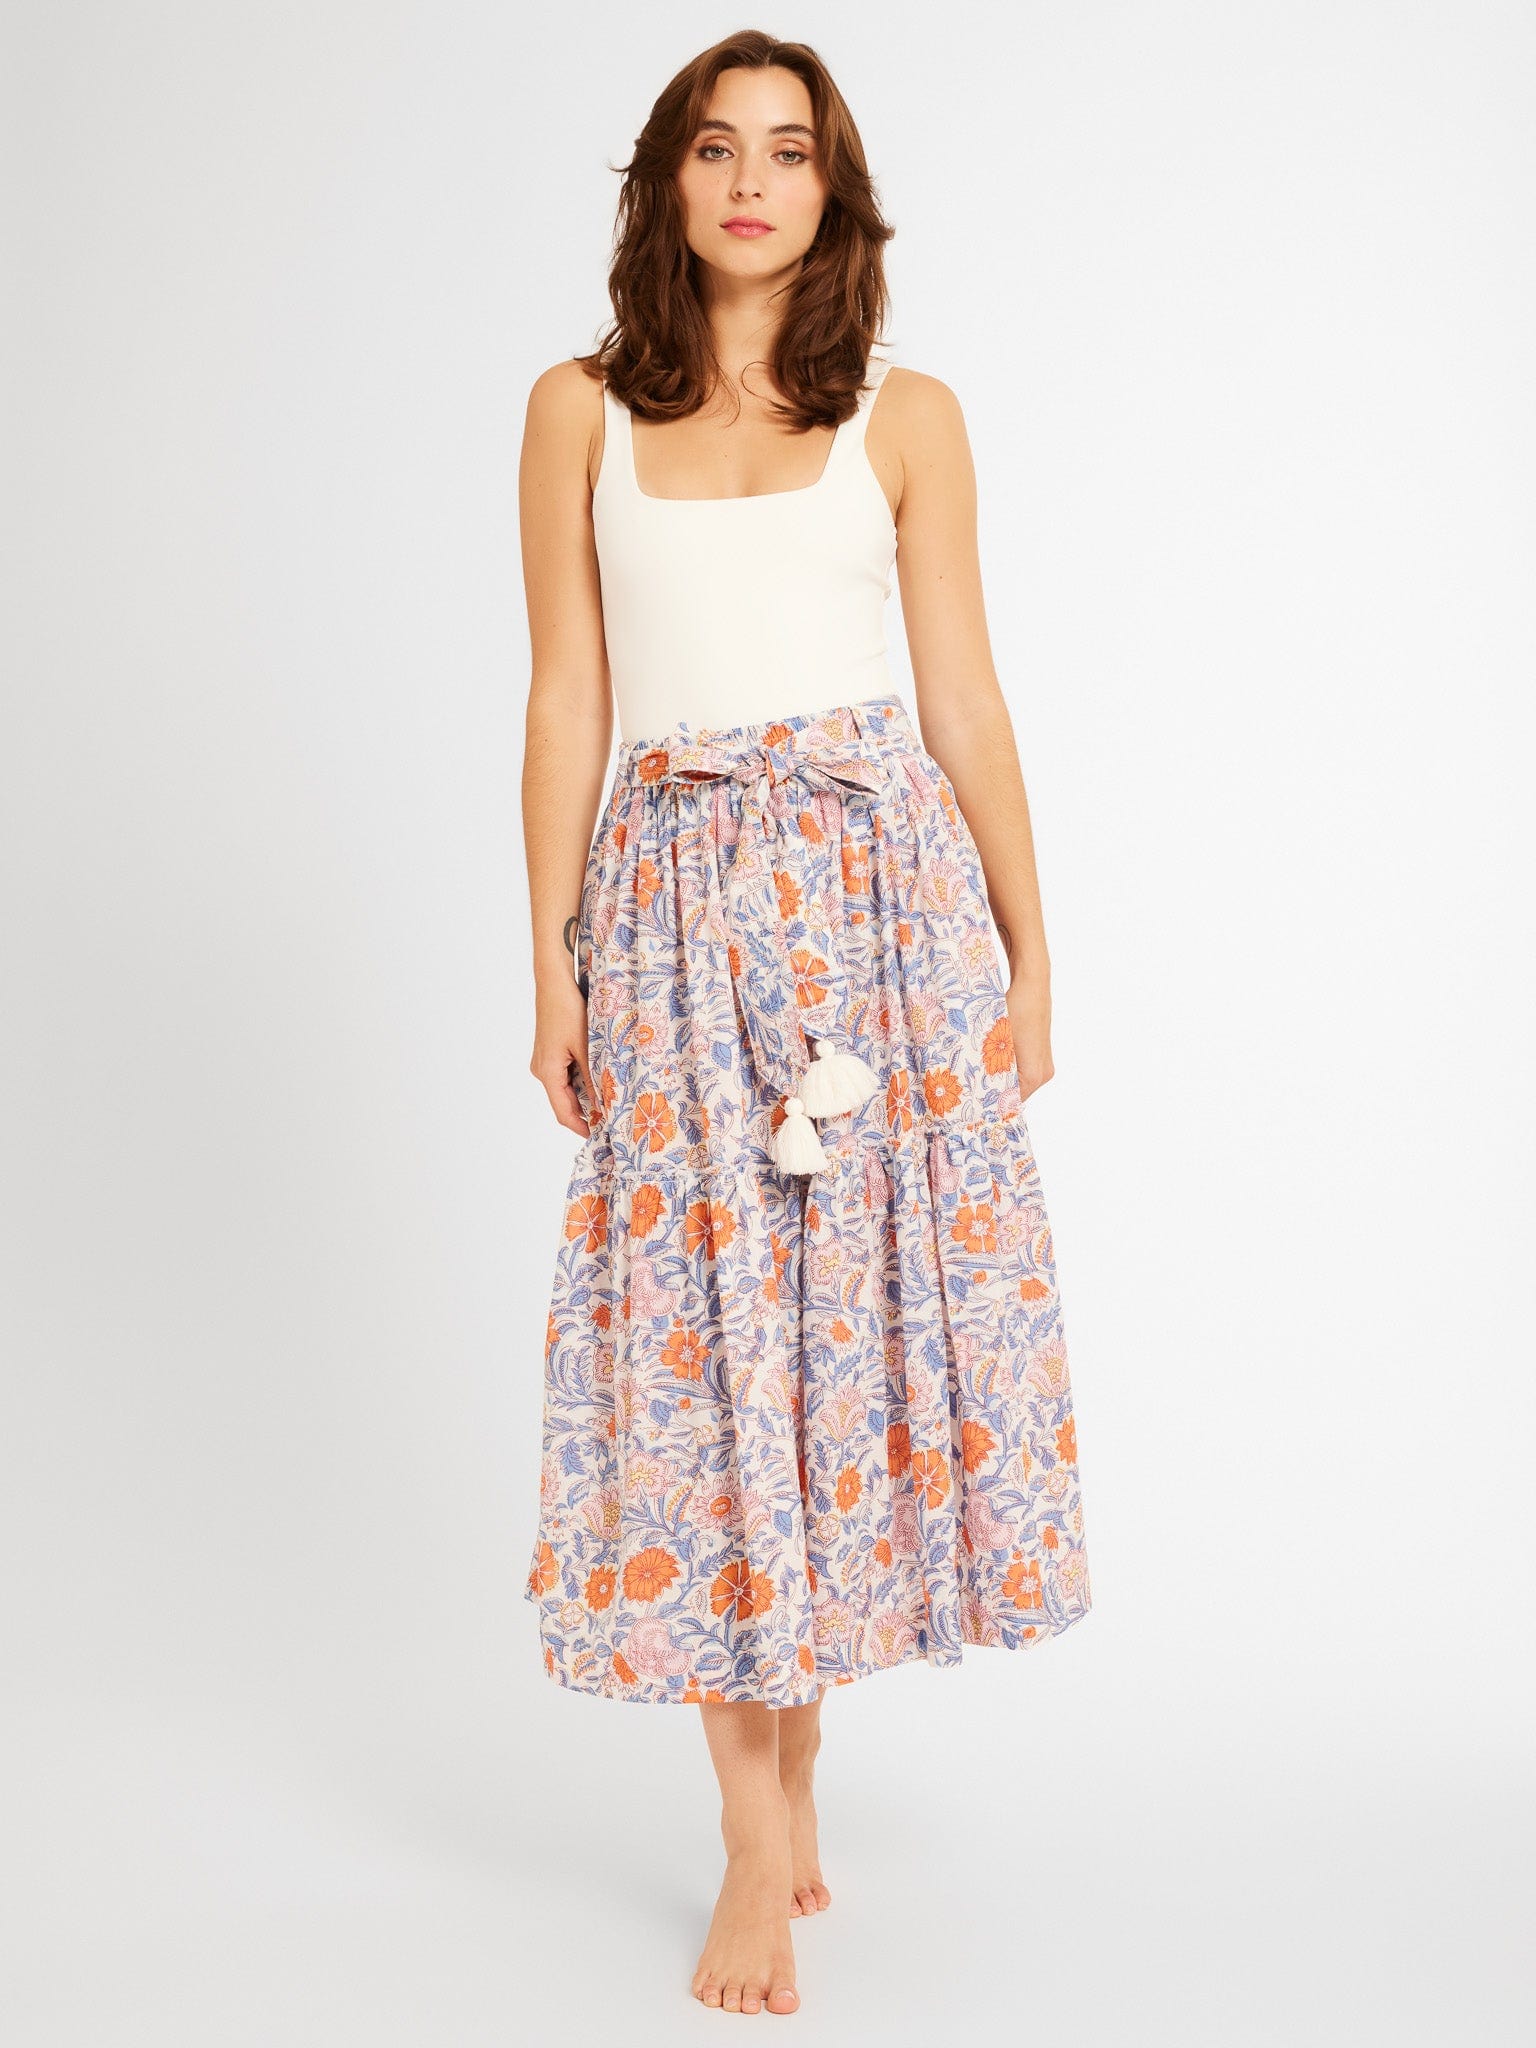 MILLE Clothing Françoise Skirt in Newport Floral